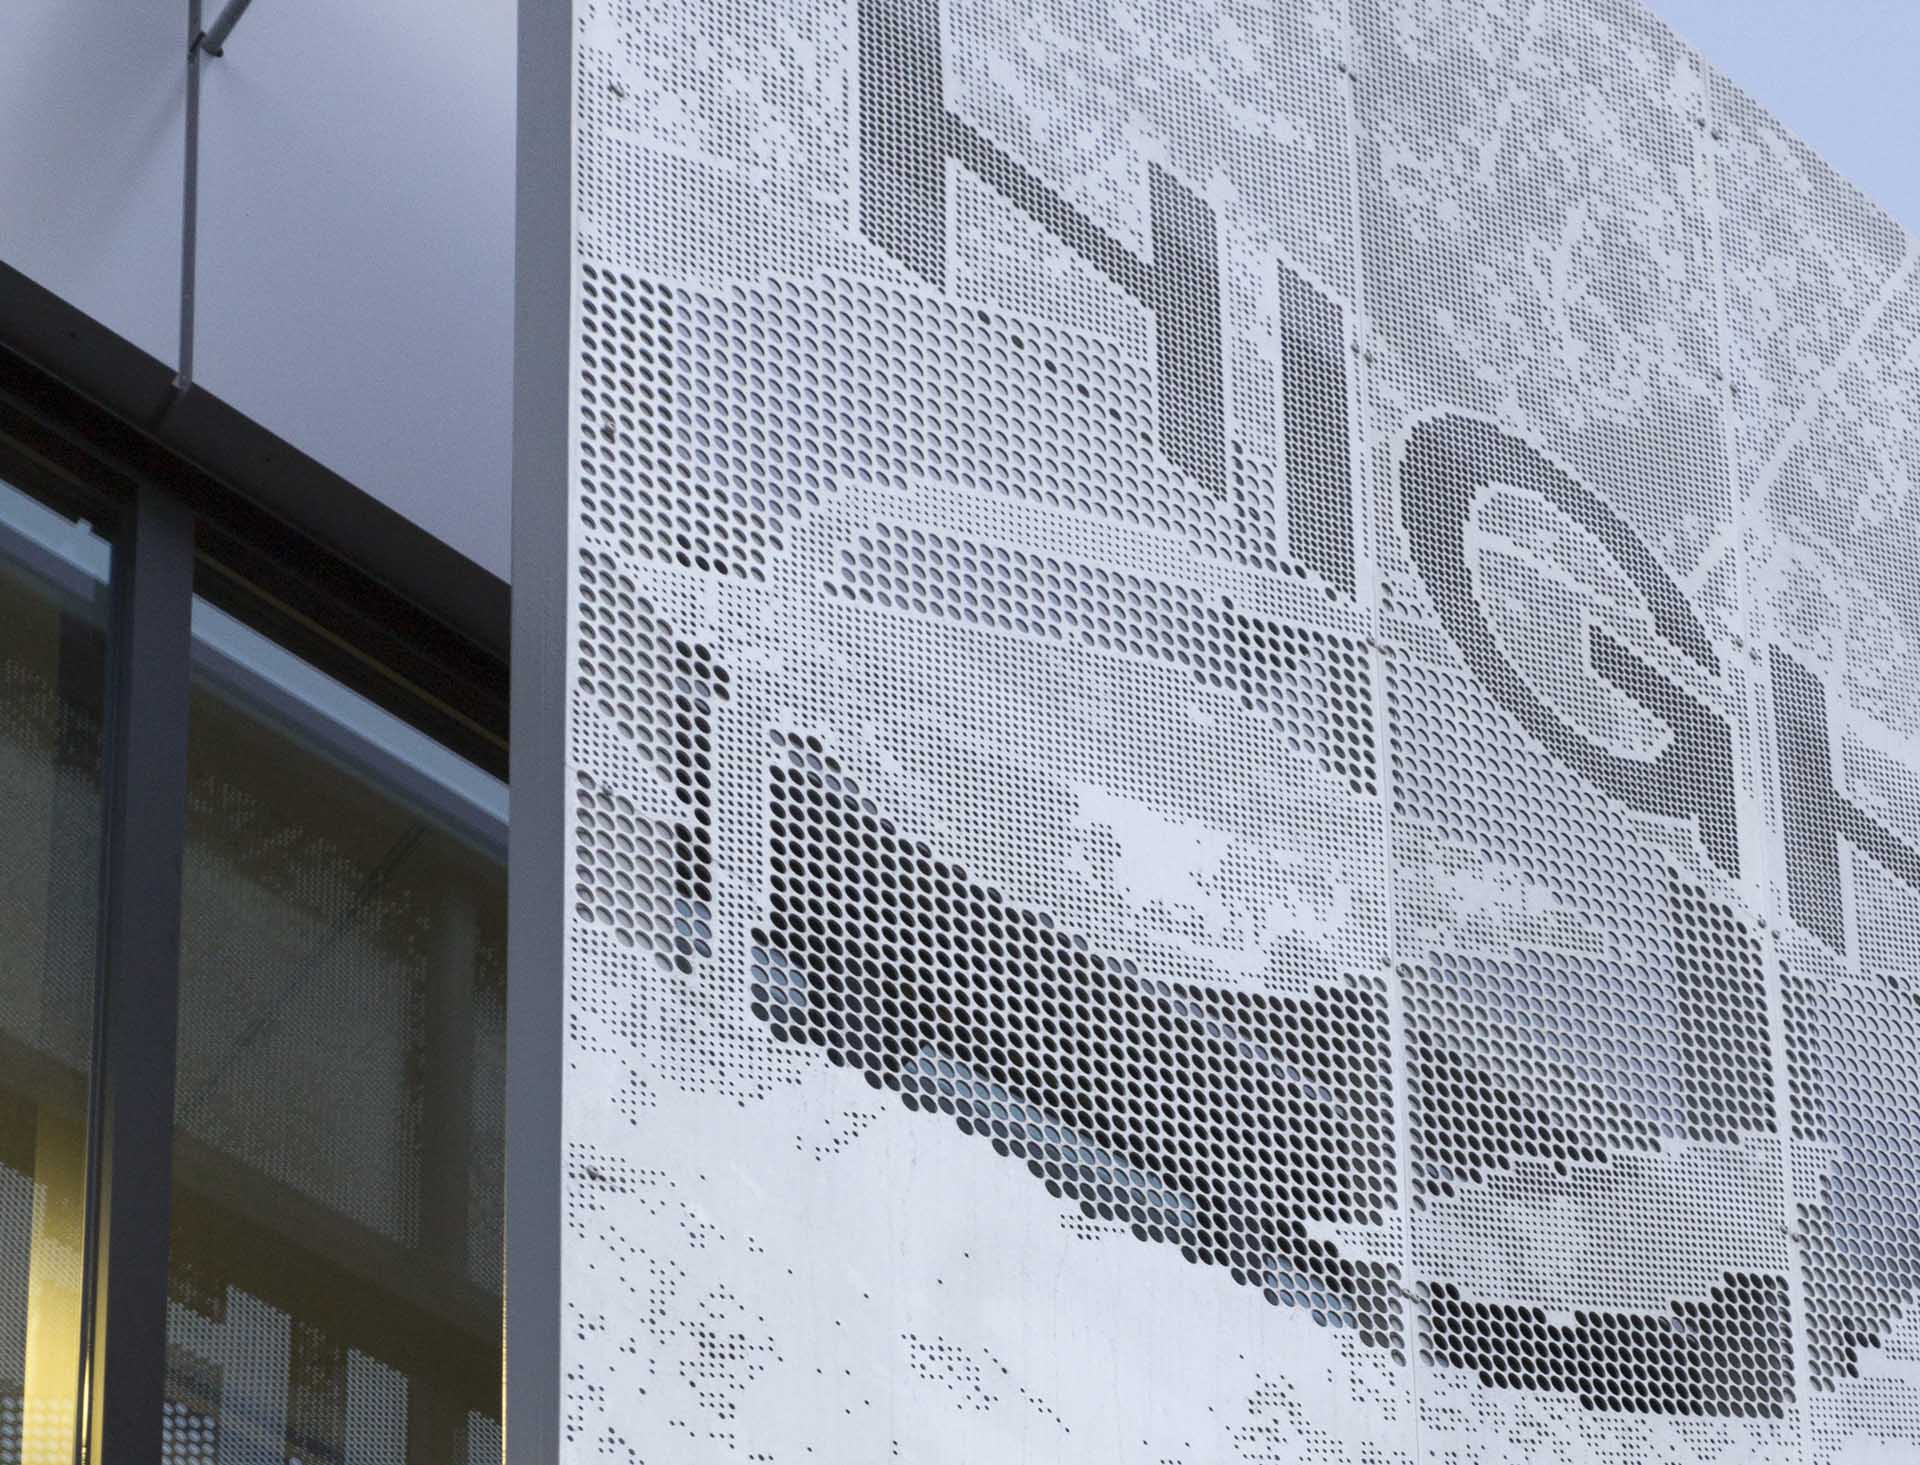 Detail of the perforated metal signage for Highland Park Community Center.